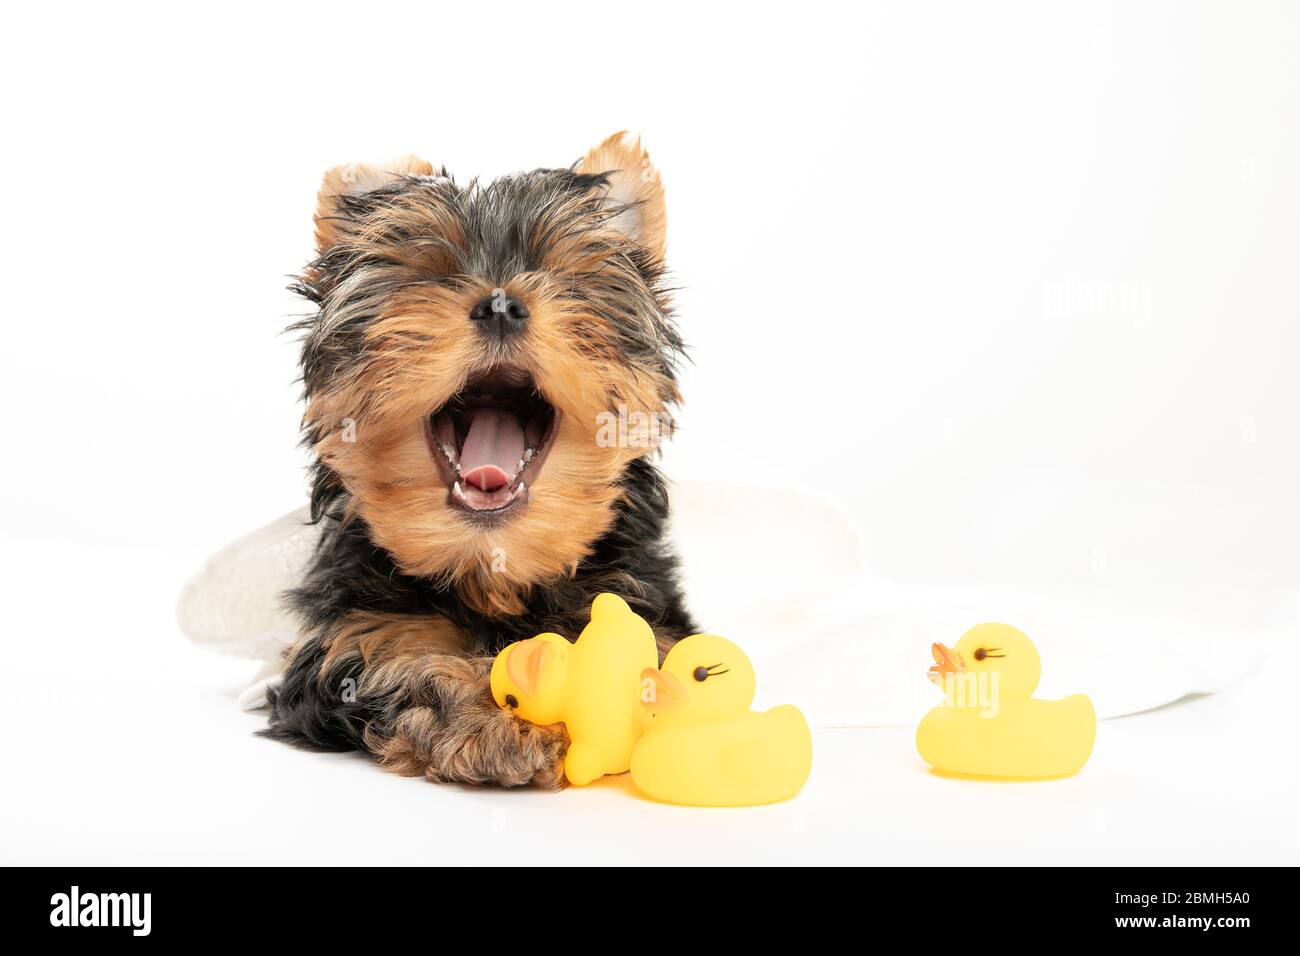 Bathing a little puppy. Yorkshire Terrier puppy in a towel with a rubber duck. Cute puppy yawns. Sleep. Relax Stock Photo